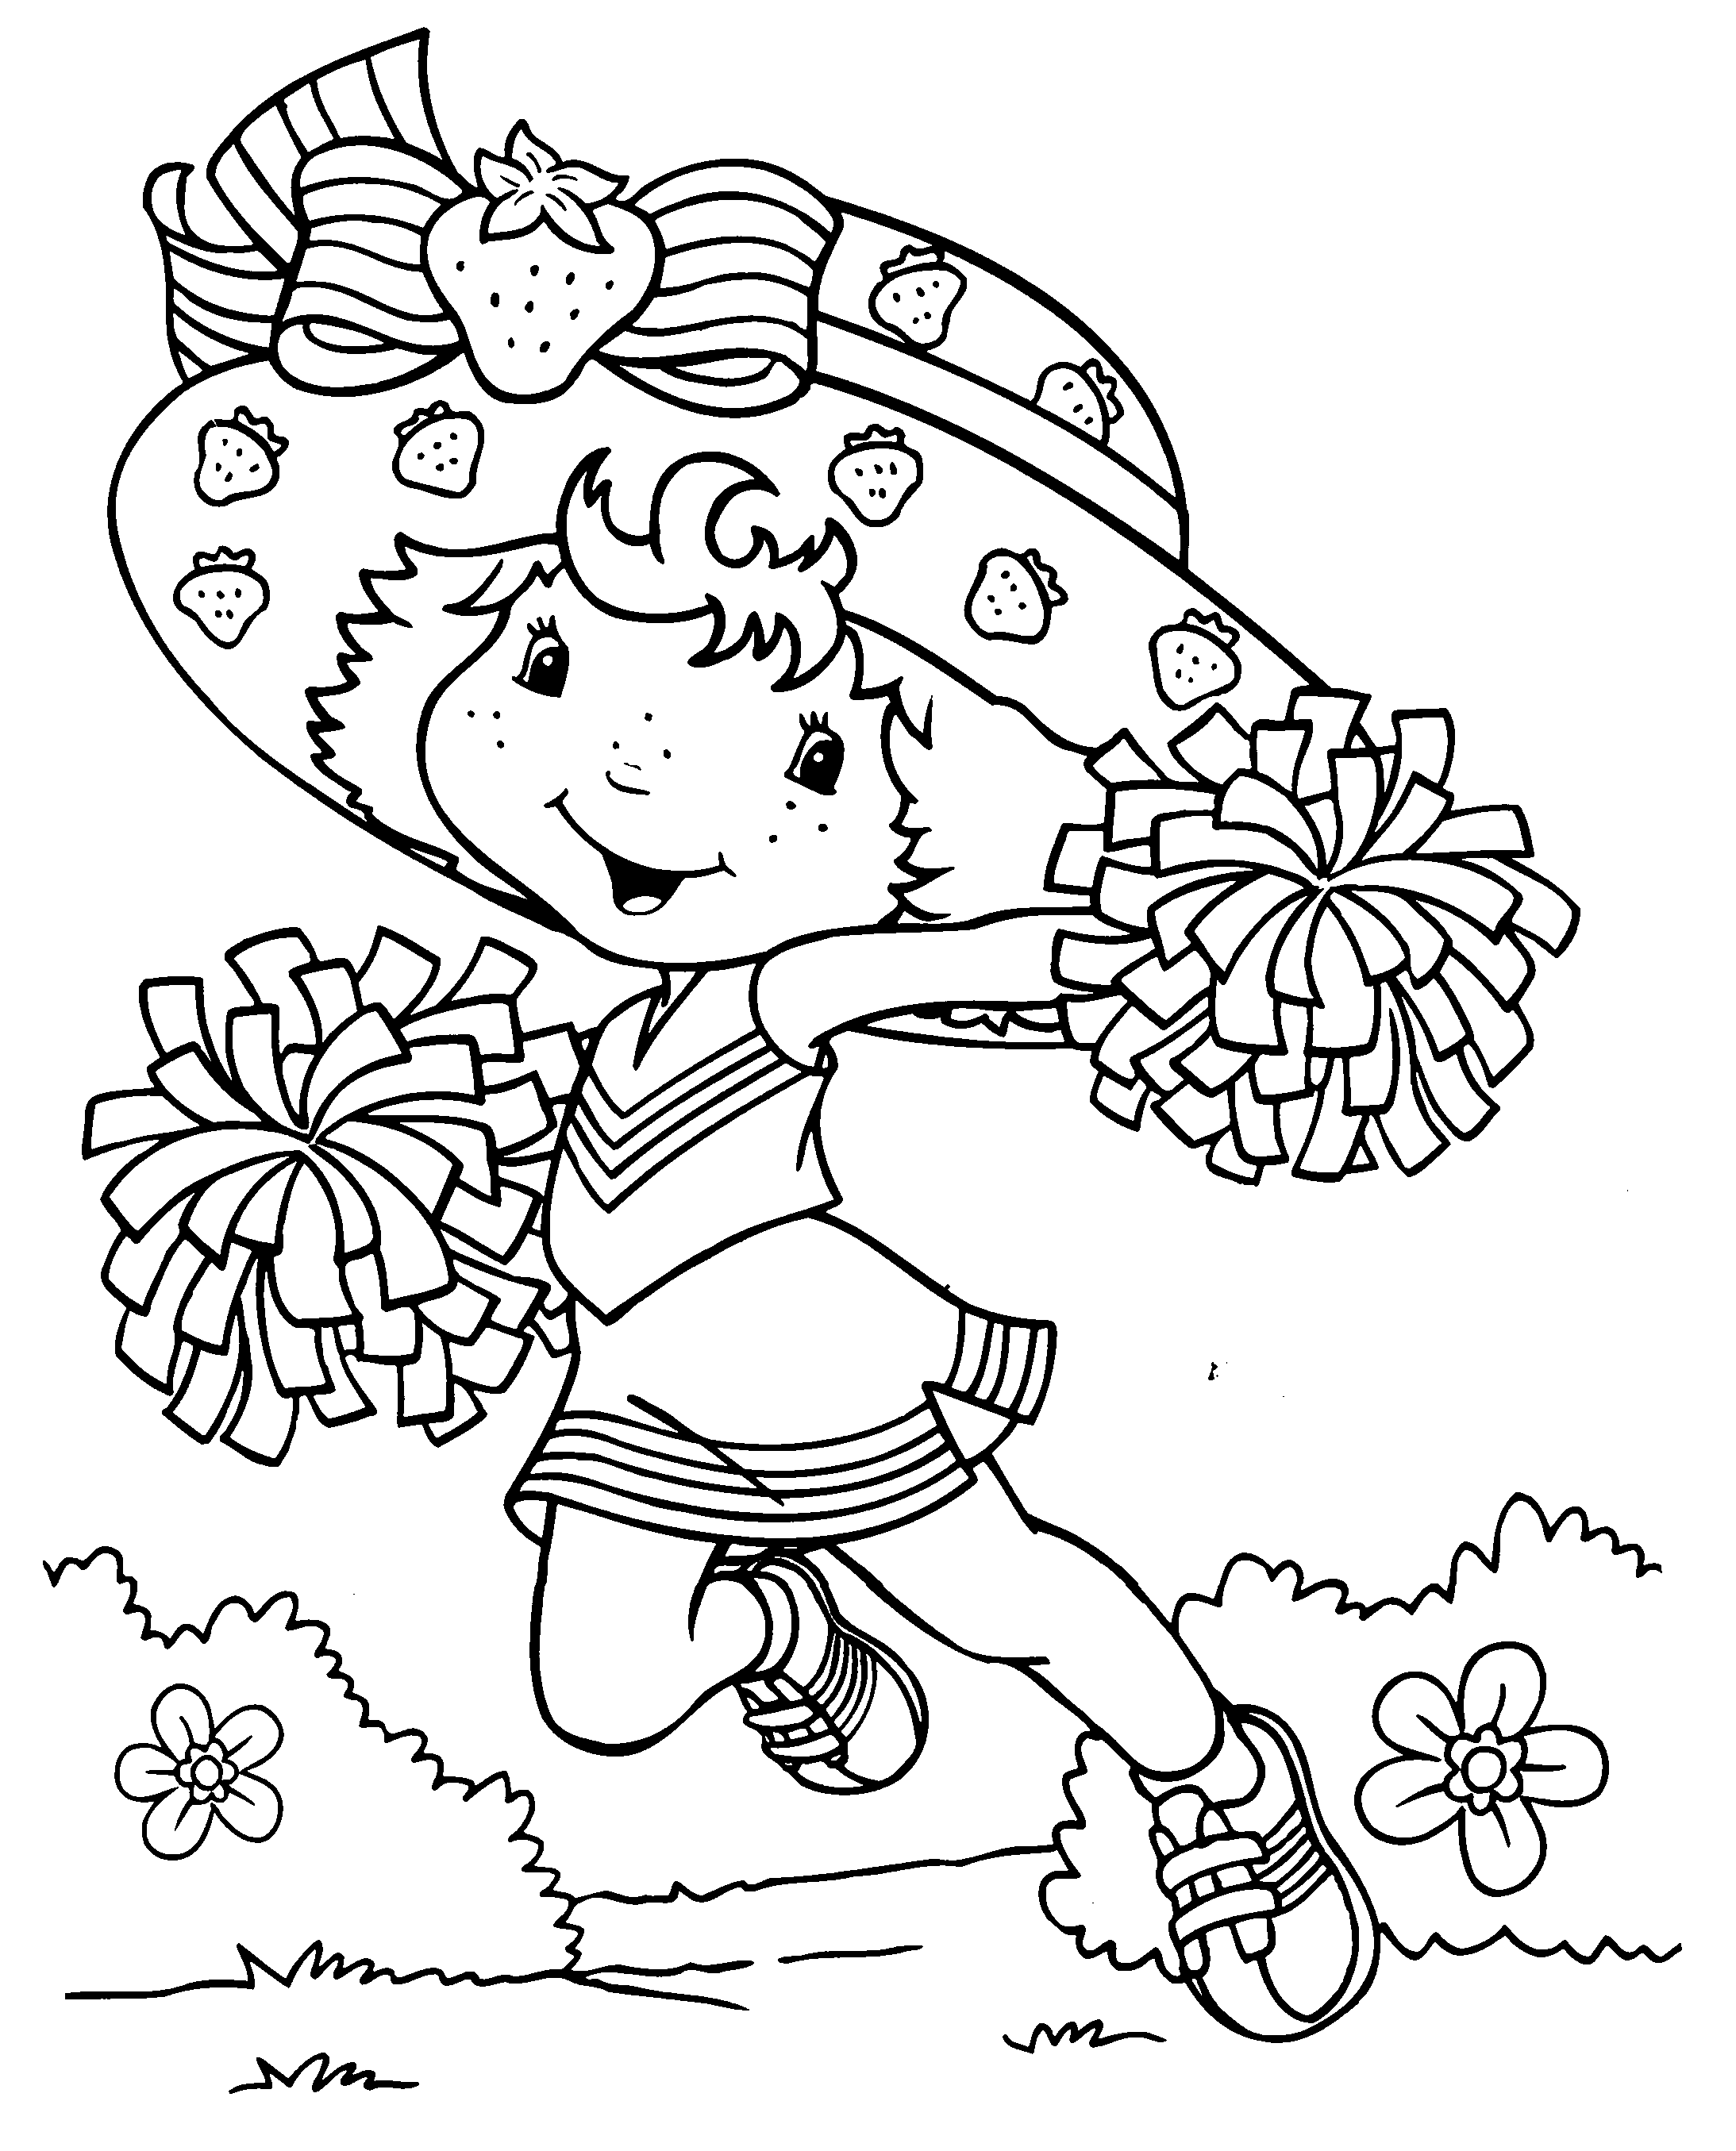 strawberry shortcake coloring page